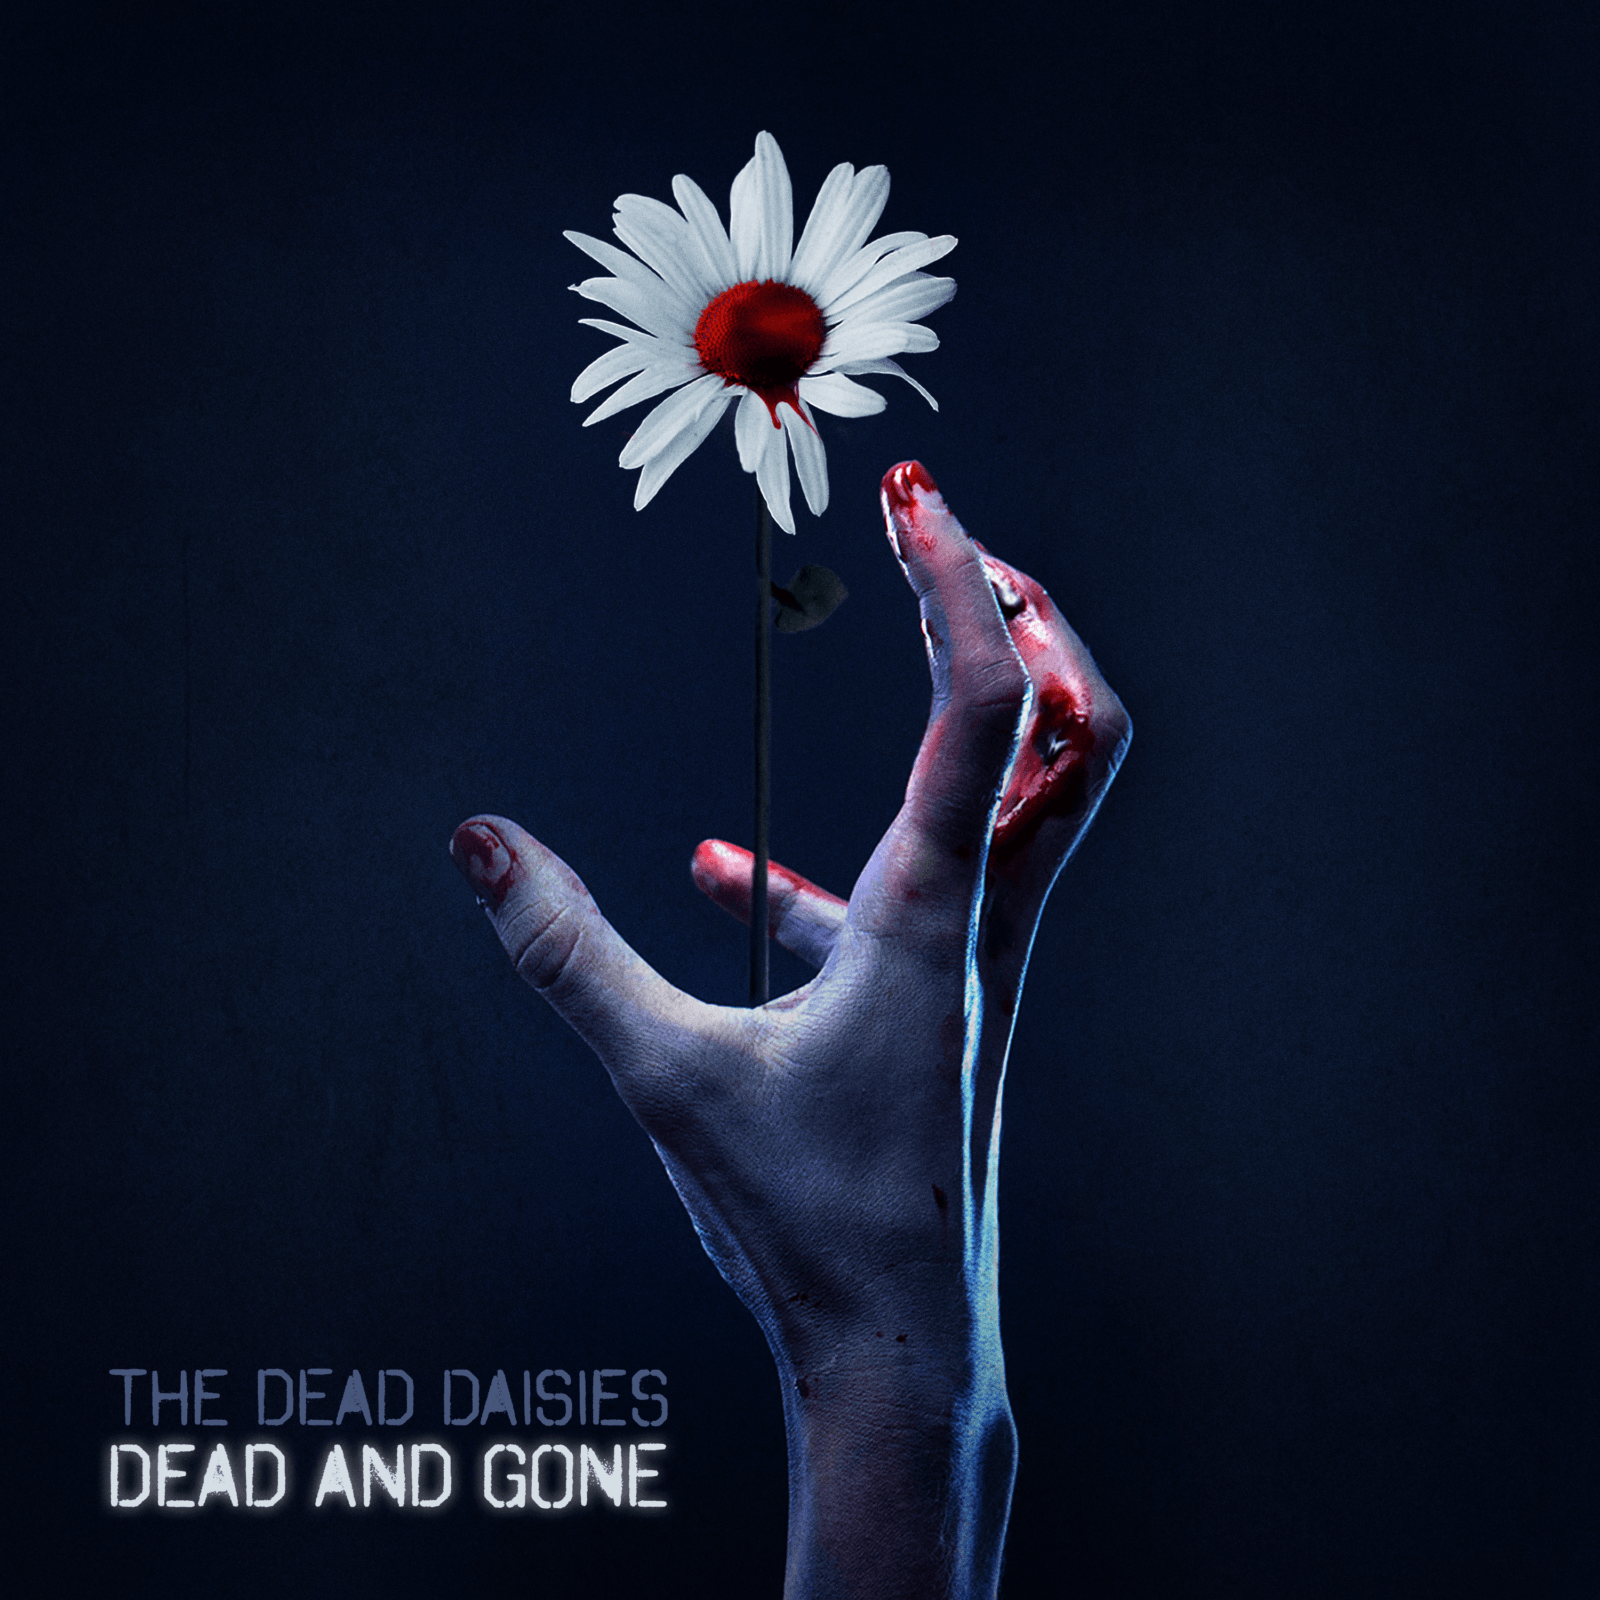 THE DEAD DAISIES - “DEAD AND GONE” - OR ARE THEY??